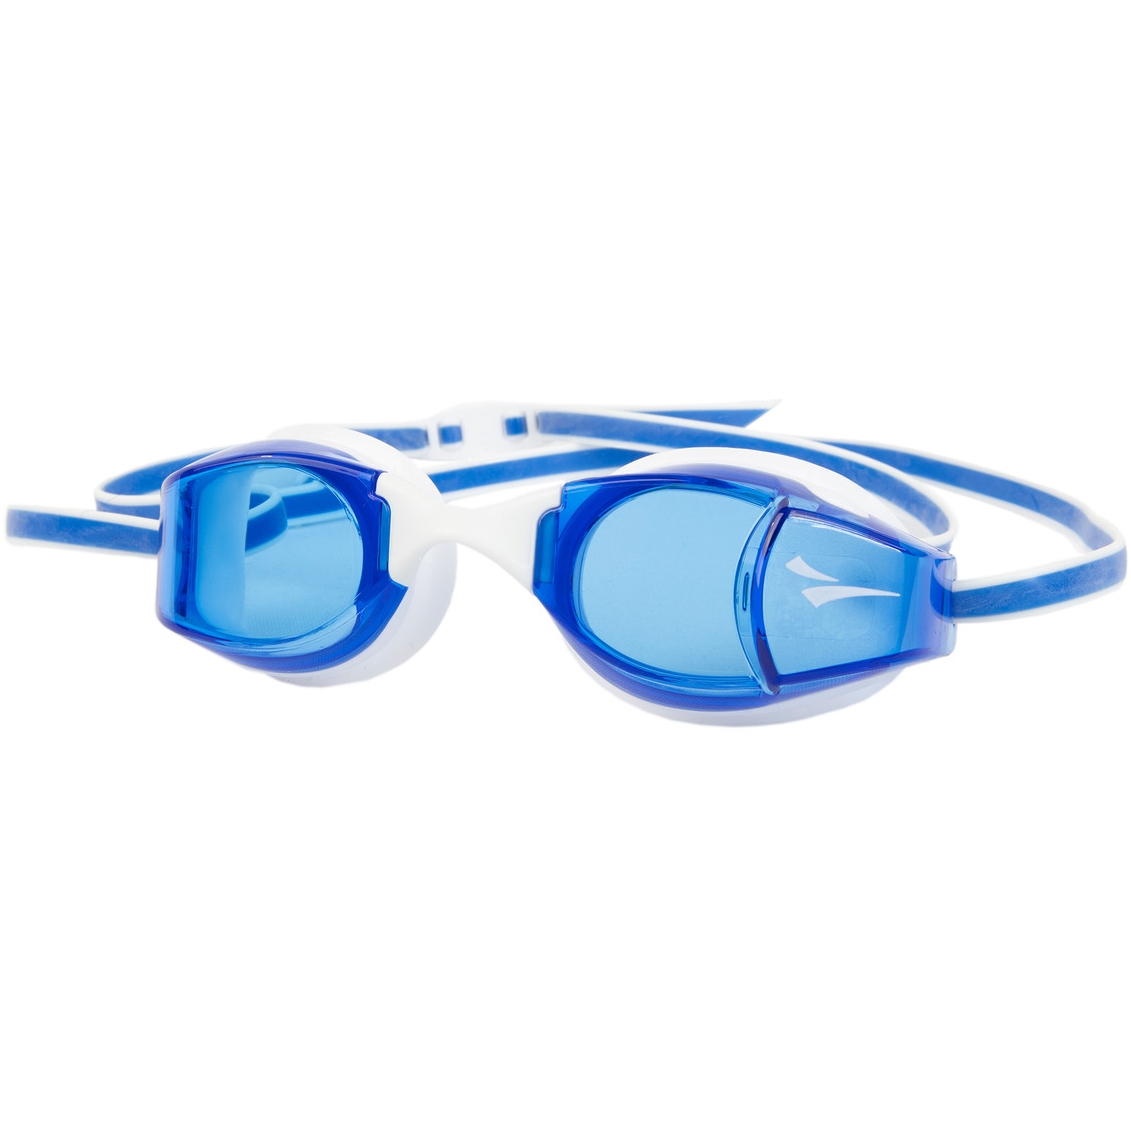 Picture of FINIS, Inc. Smart Goggle - blue